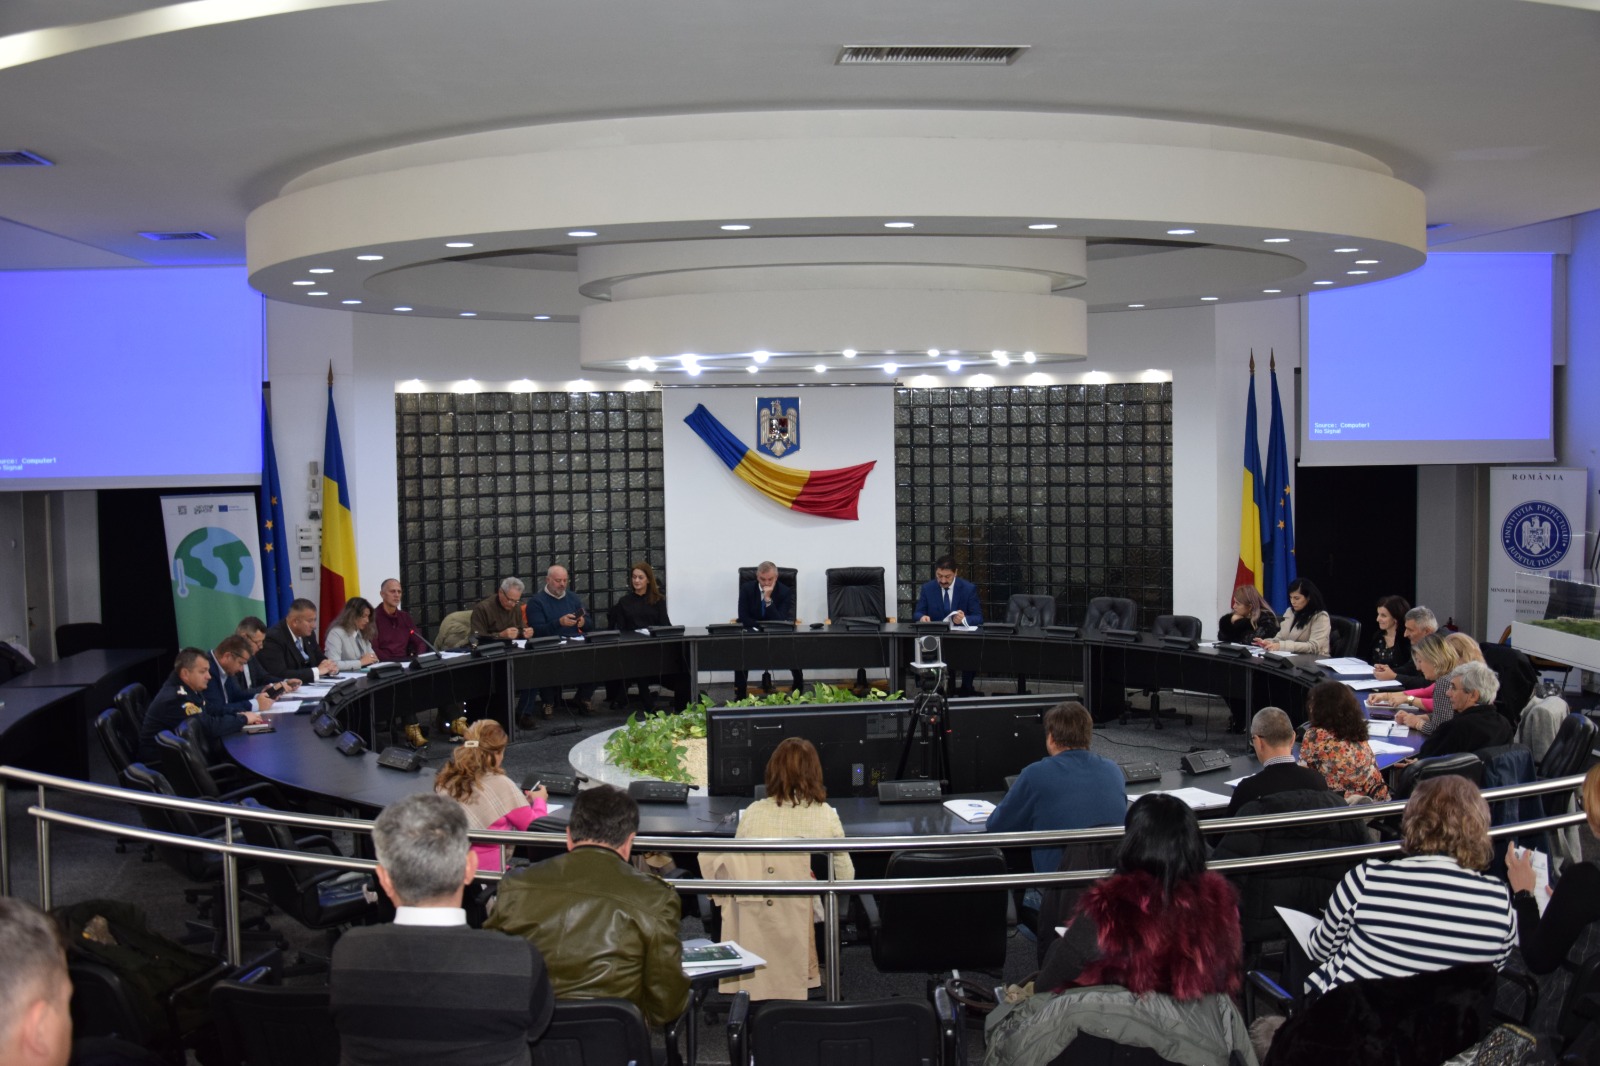 Tulcea Municipality organises Tulcea County Advisory Board for Climate Changes to develop climate adaptation and mitigation strategies